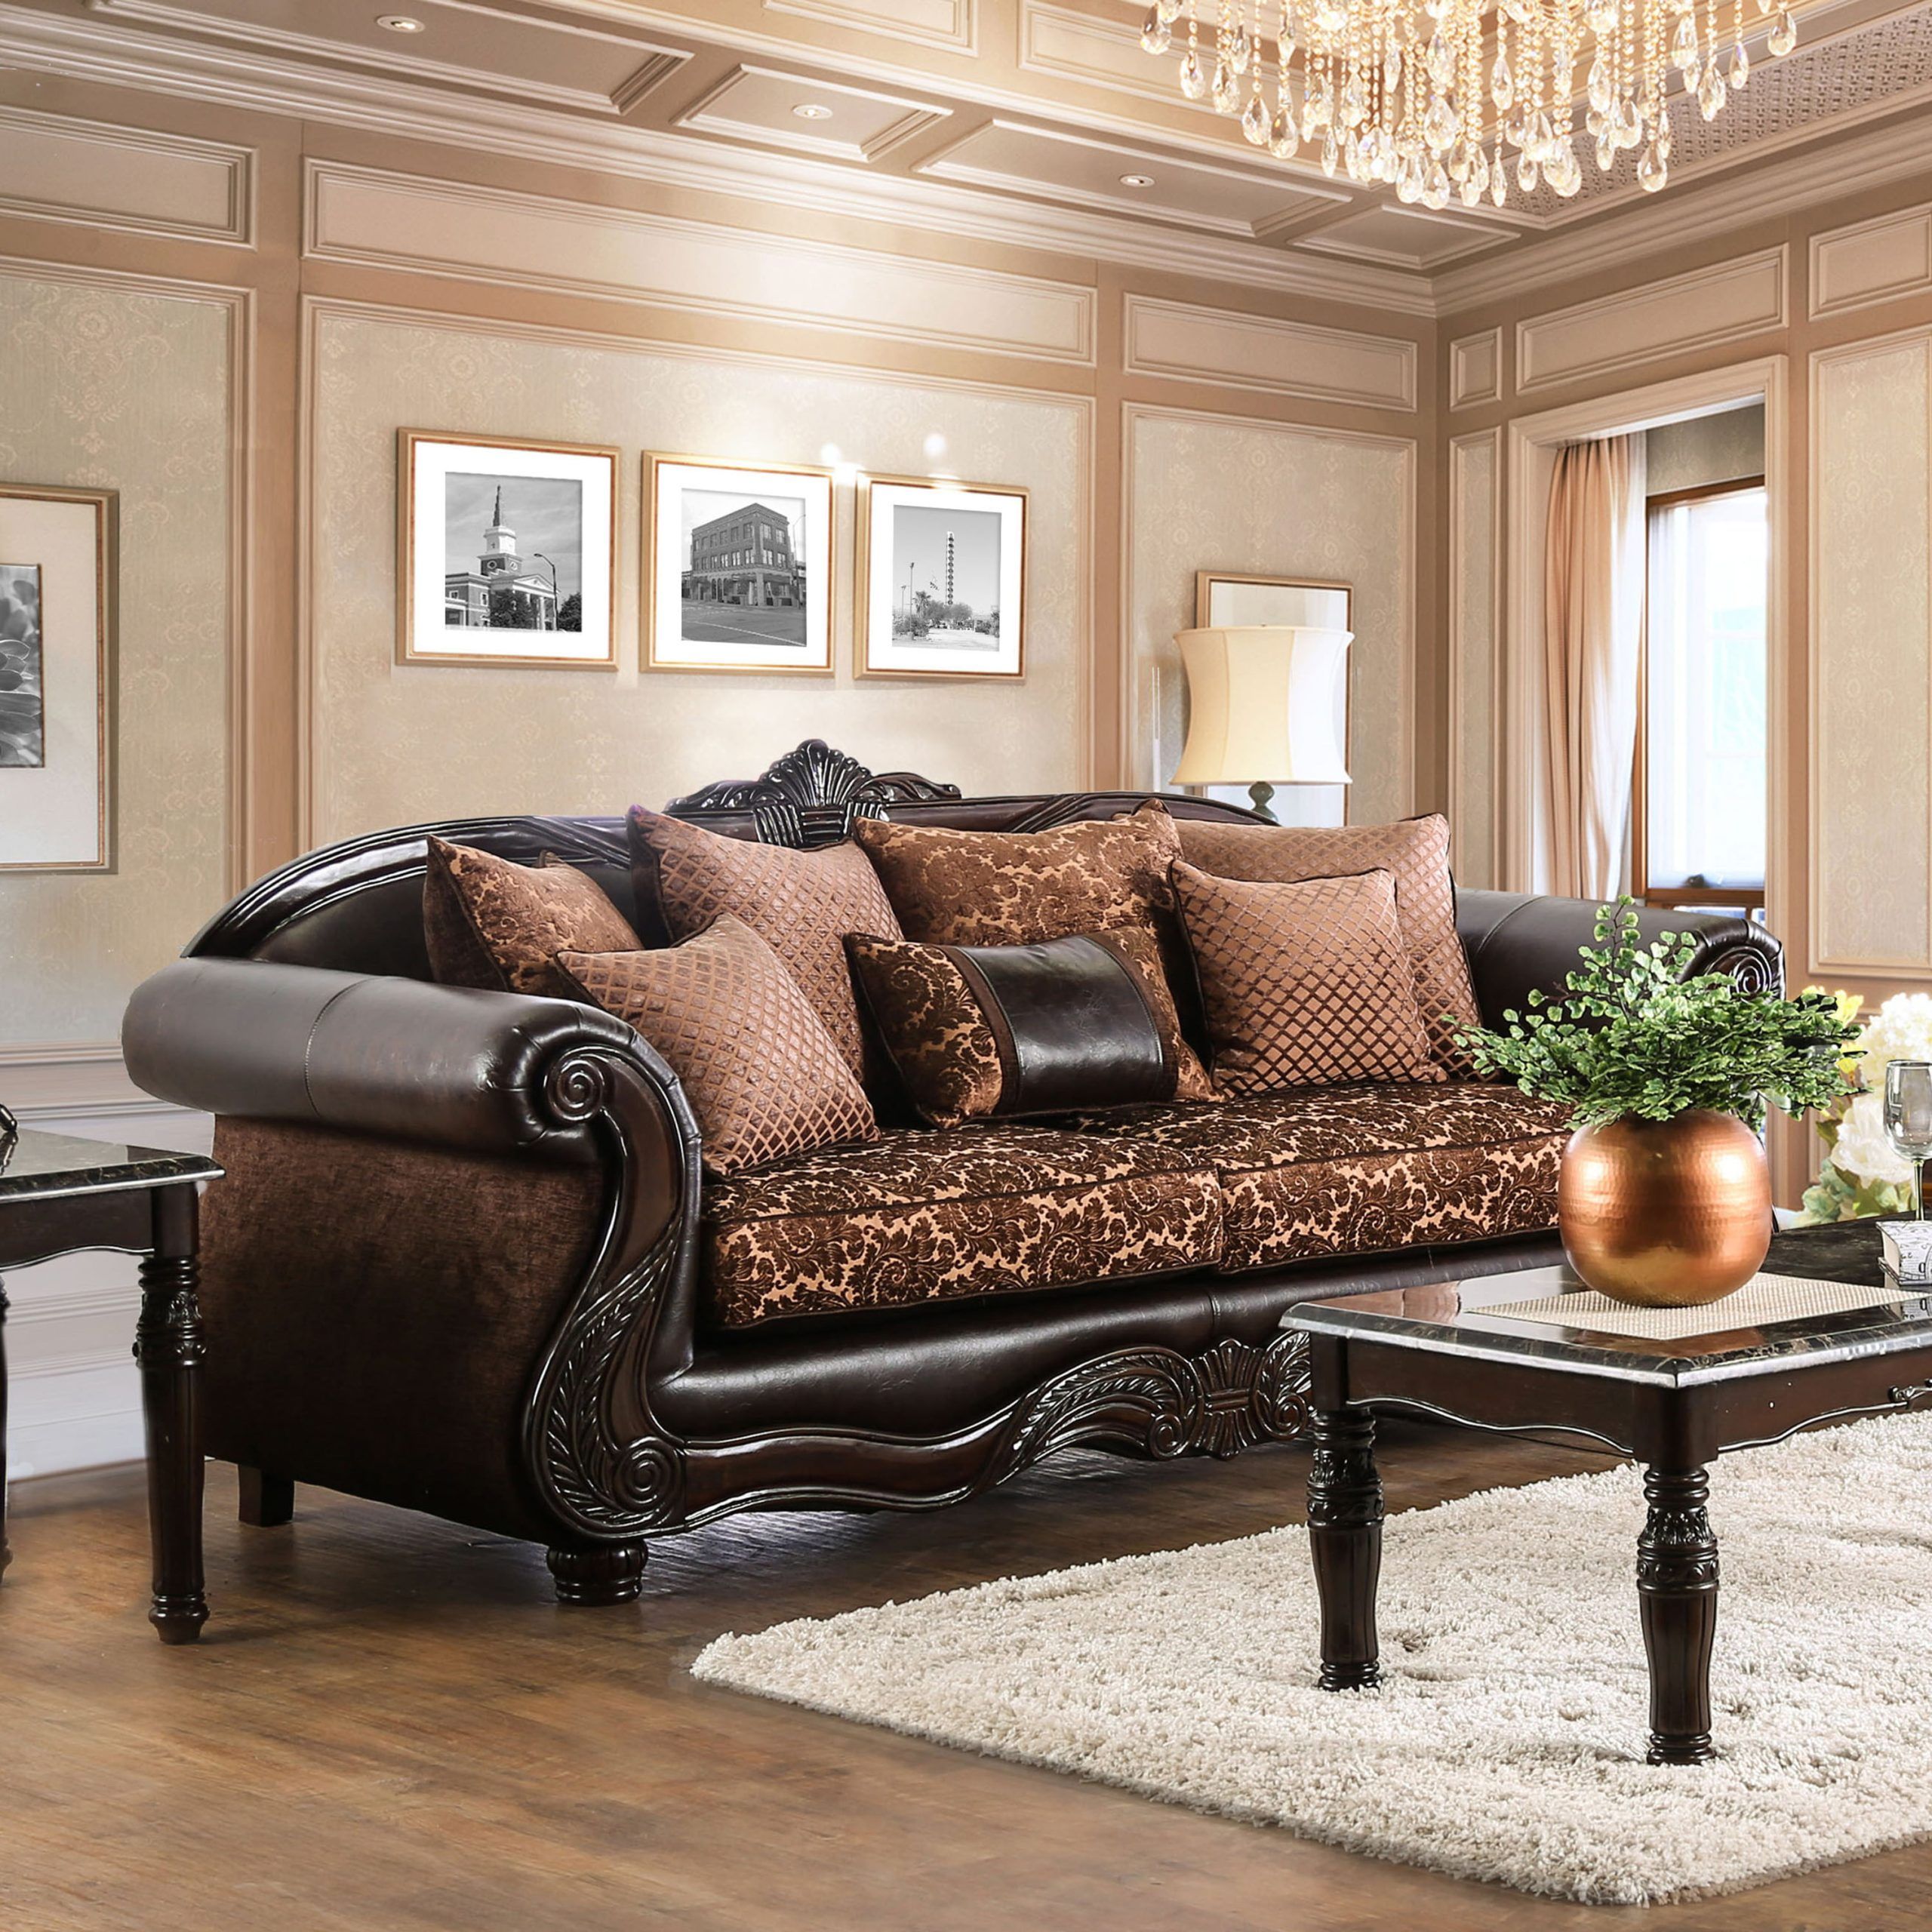 Furniture Of America Traditional Faux Leather Hannon Sofa, Brown Throughout Faux Leather Sofas In Chocolate Brown (View 7 of 20)